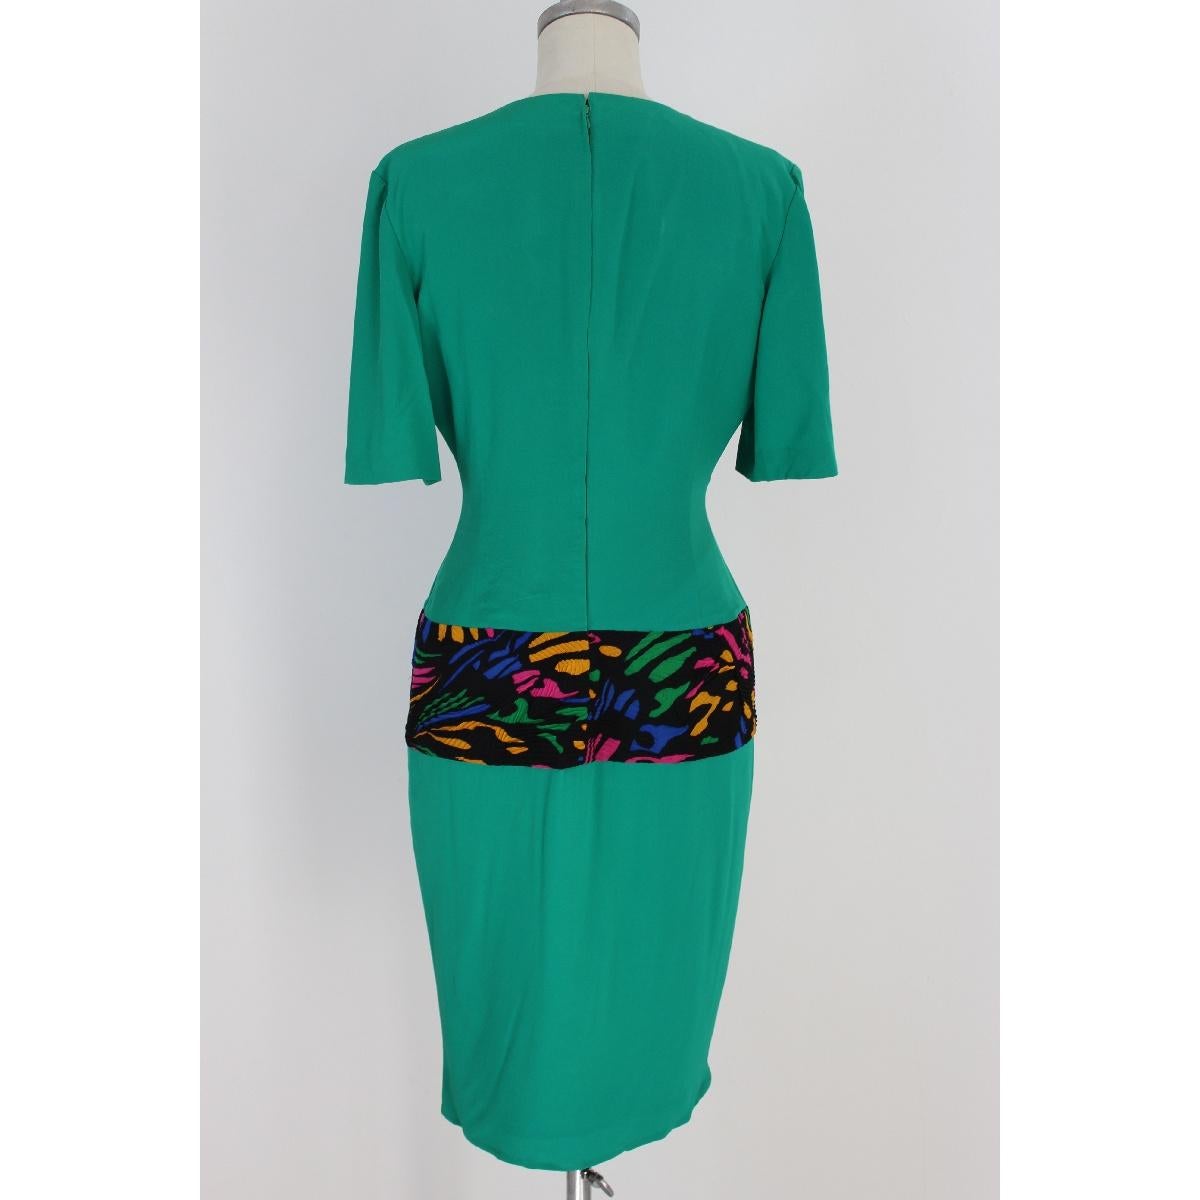 Mila Schon Green Silk Sheath Evening Dress In New Condition For Sale In Brindisi, Bt